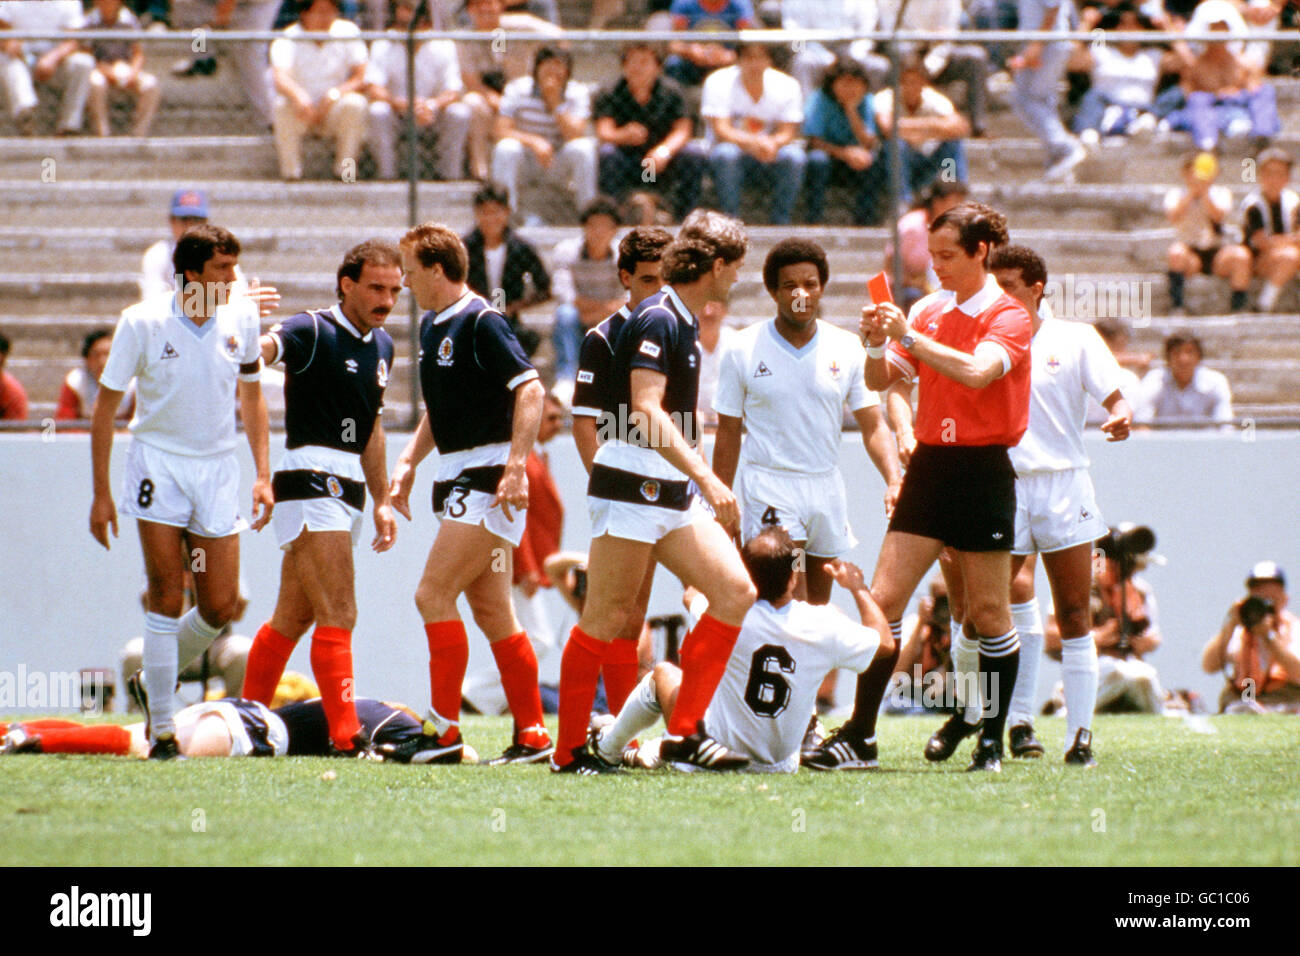 Referee Joel Quiniou (second r) shows the red card to Uruguay's Jose Batista (6, on floor) after he hacked down Scotland's Gordon Strachan (l, on floor) in the first minute of the game. Milling around are Scotland's Willie Miller (second l), Steve Nicol (third l), Paul McStay (fourth l) and Roy Aitken (fifth l), and Uruguay's Jorge Barrios (l) and Victor Diogo (third r) Stock Photo